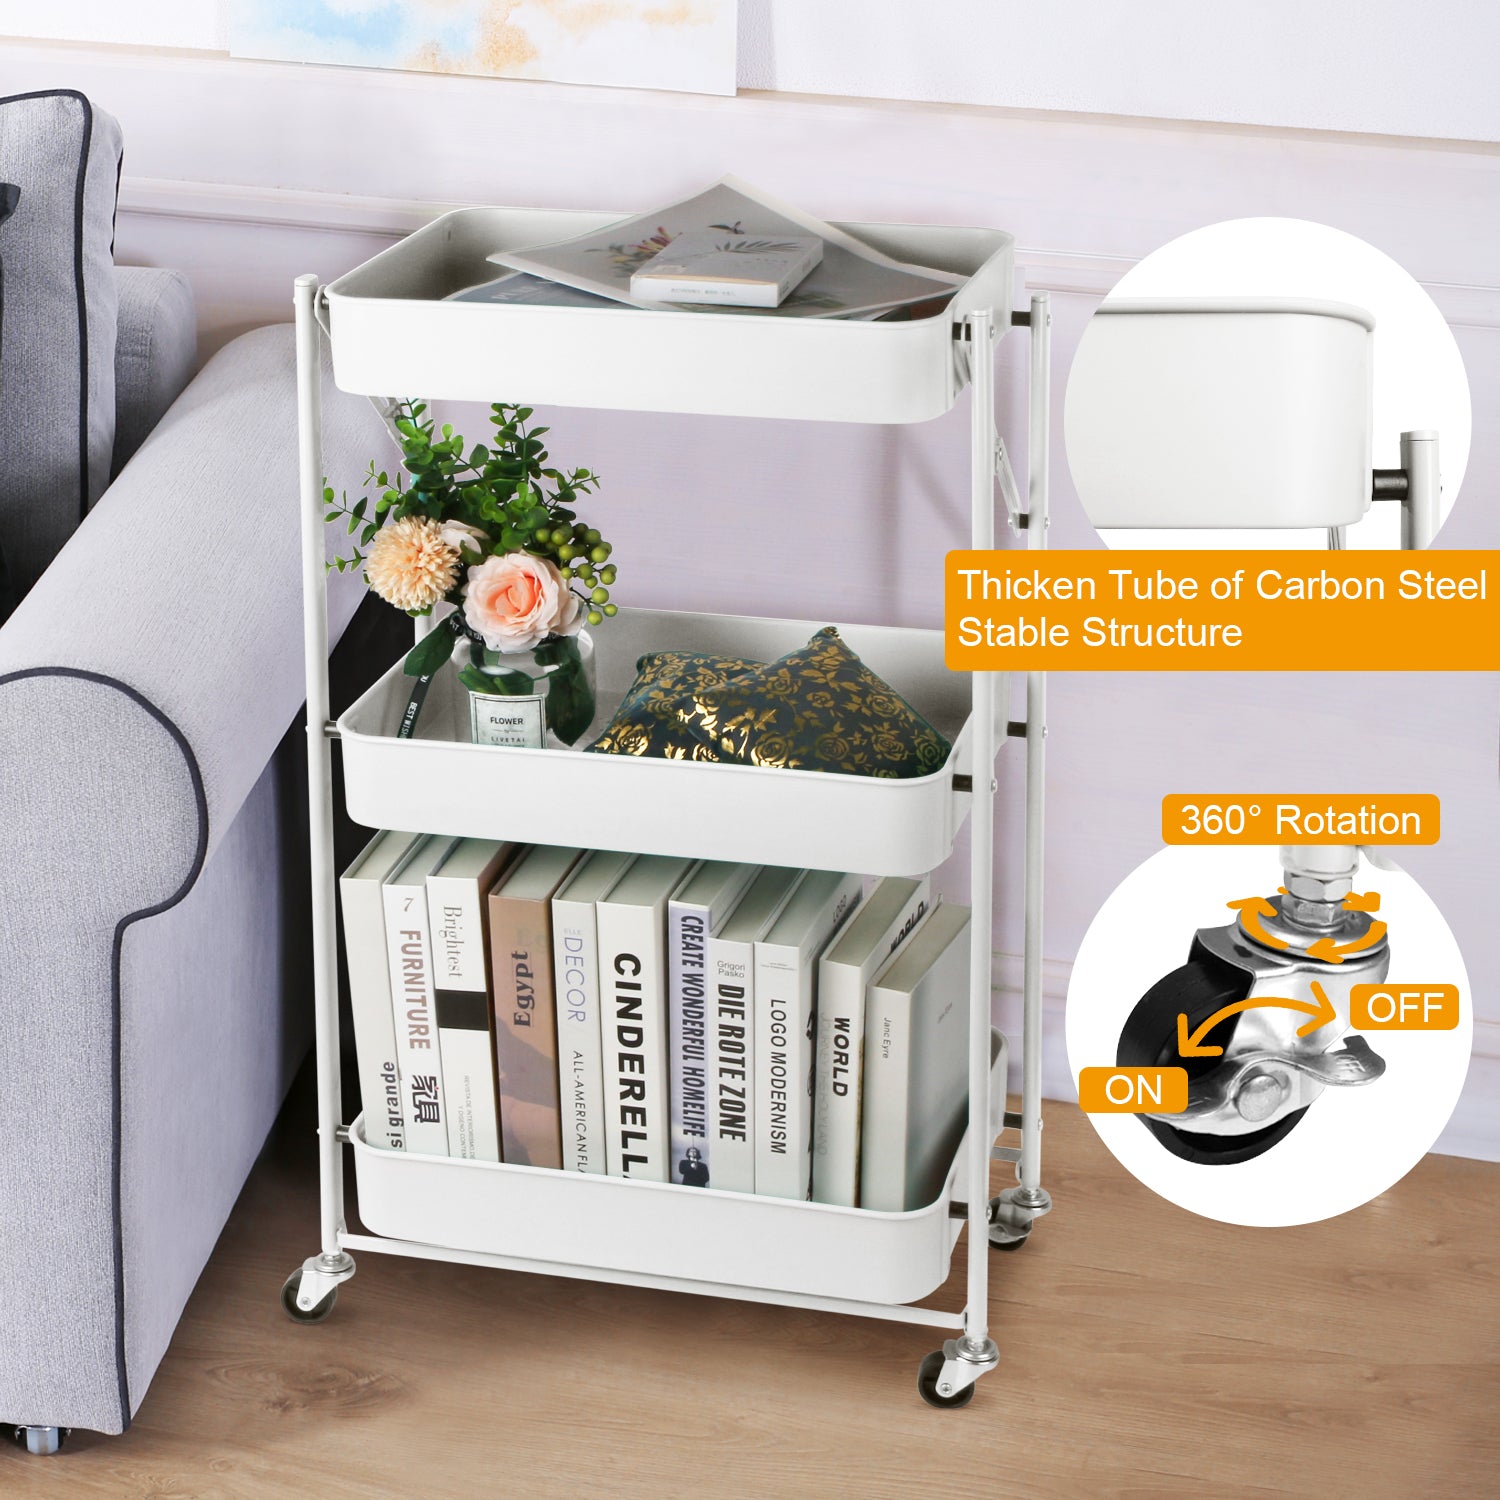 Todeco-Foldable-Serving-Trolley-3-Tier-Kitchen-Cart-Storage-Unit-with-Utility-Wheels-for-Kitchen-Office-Bathroom-Cloakroom-46-29-5-78-5-cm-White